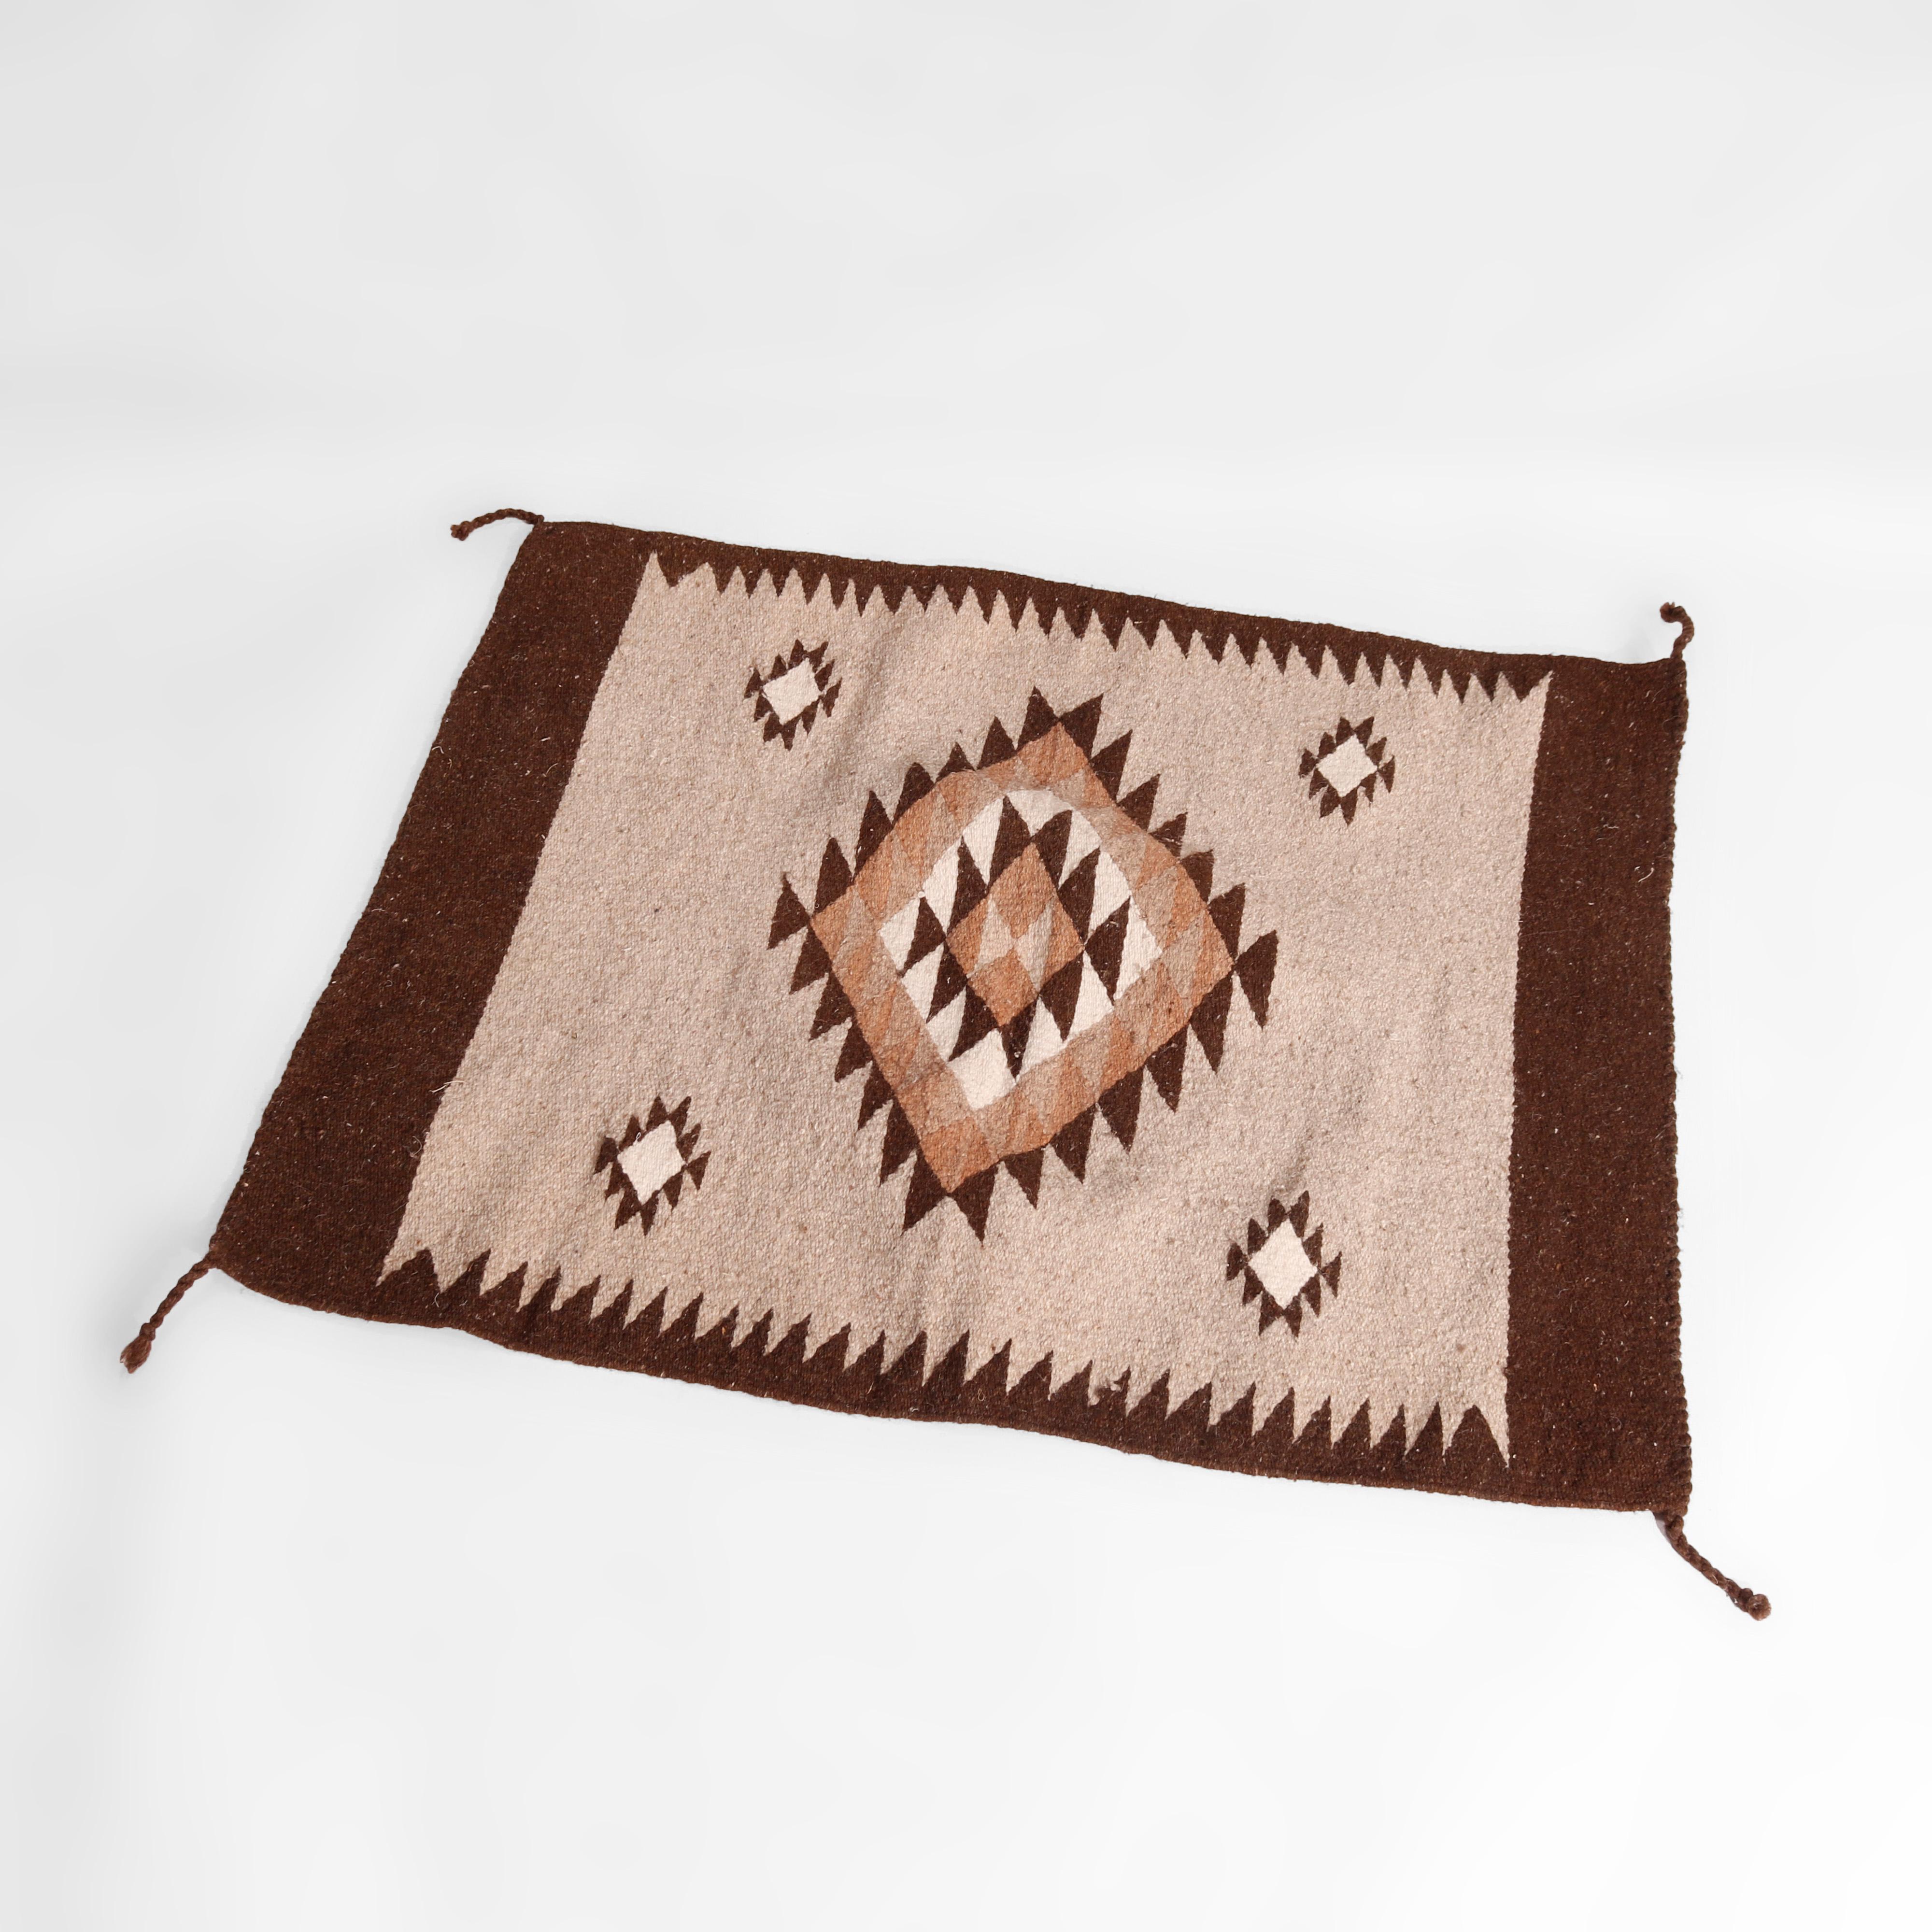 An antique southwestern native American Indian Navajo style rug offers wool construction with central diamond medallion c1920

Measures- 35.25''L x 29.5''W x .5''D.

Catalogue Note: Ask about DISCOUNTED DELIVERY RATES available to most regions